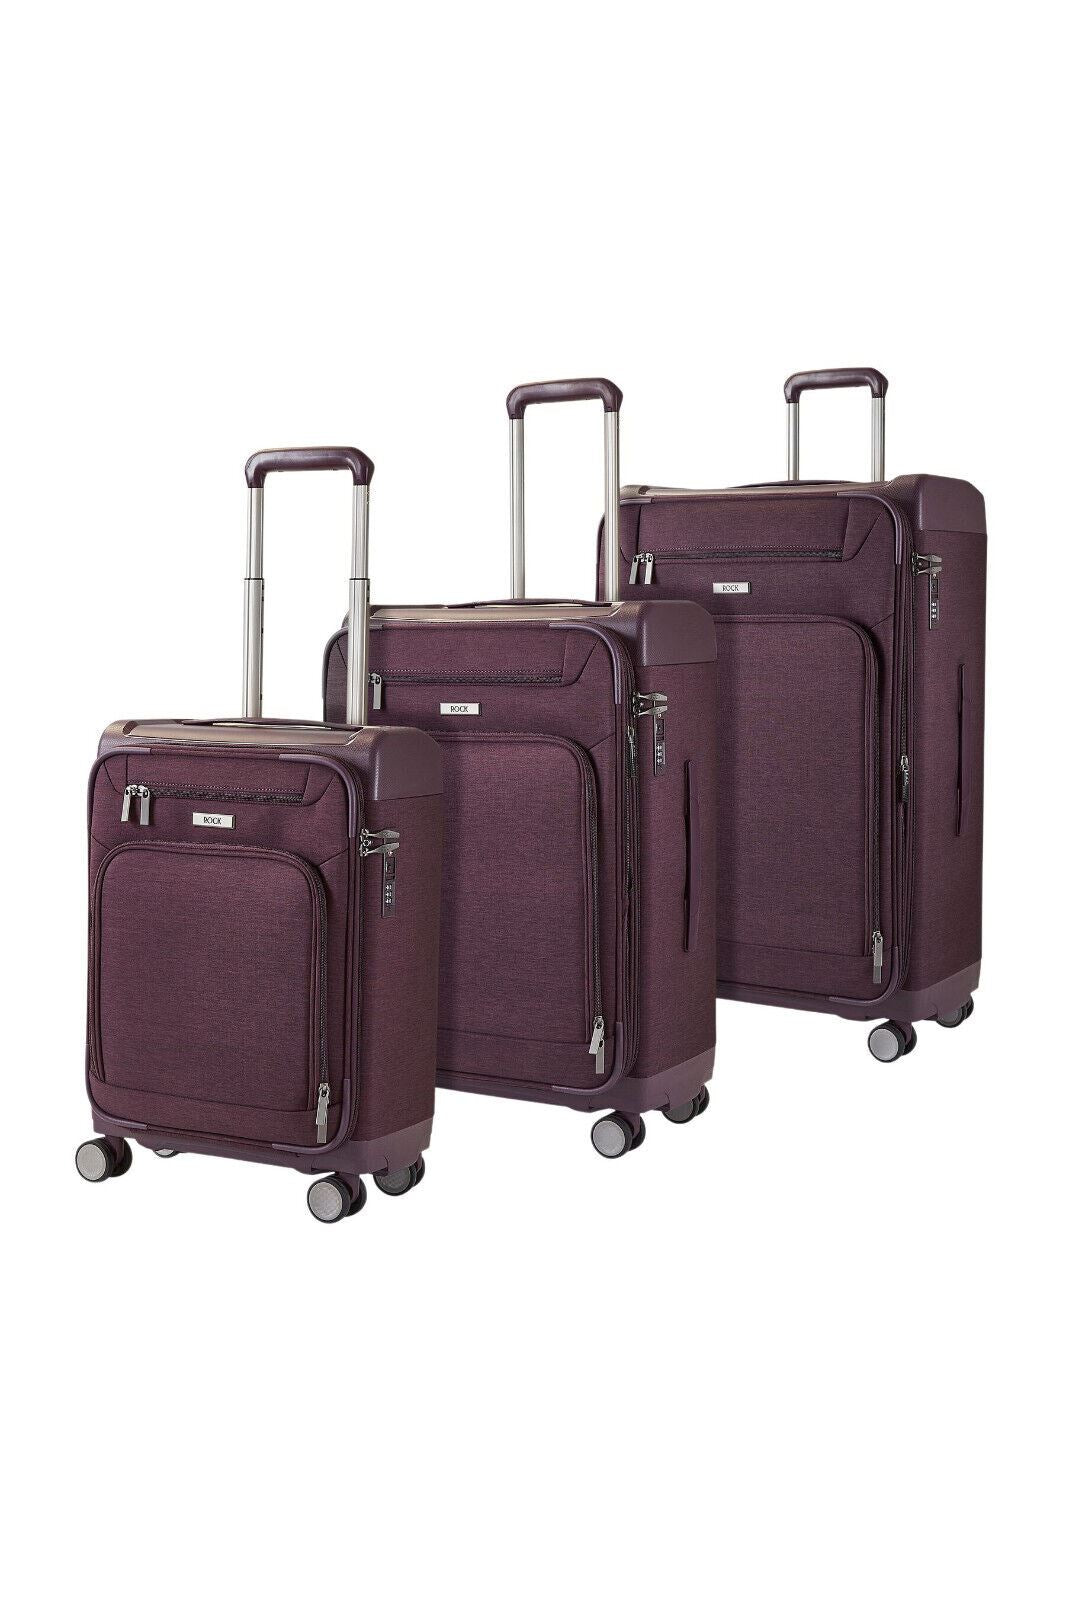 Lightweight Purple Soft Suitcases 4 Wheel Luggage Travel Trolley Cases Cabin Bags - Upperclass Fashions 